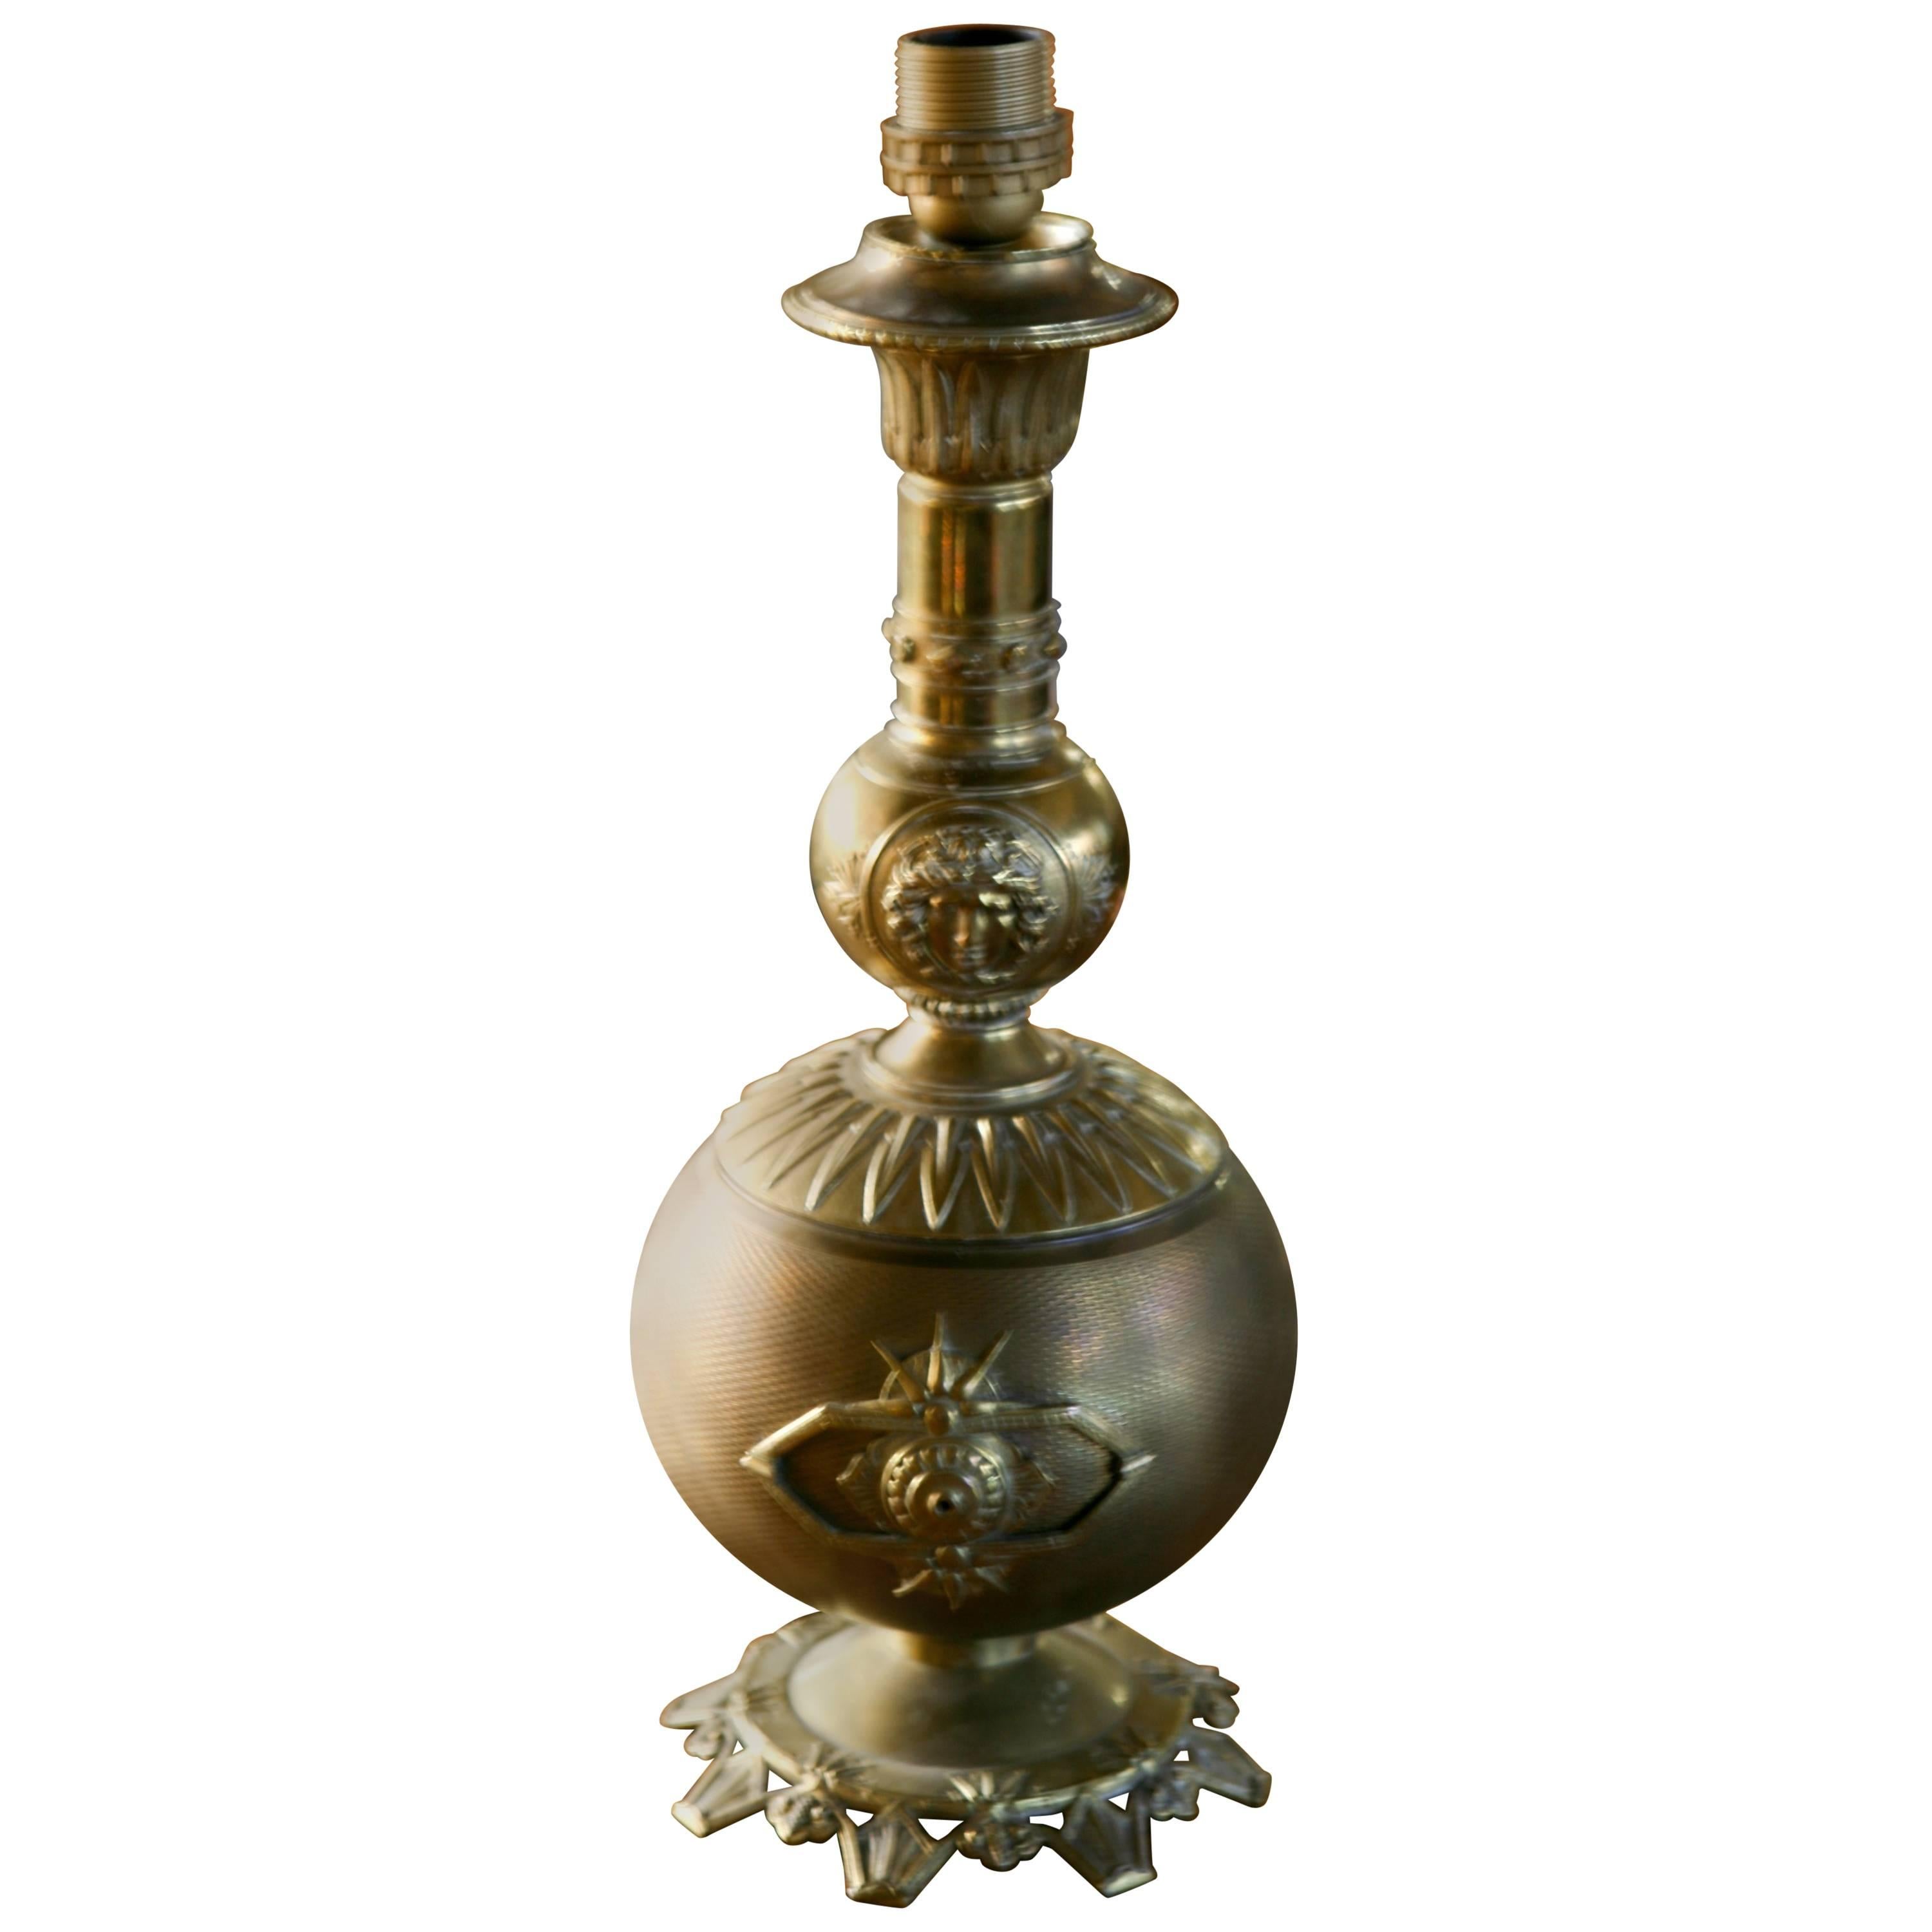 19th Century High Relief Cast Bronze Oil Lamp Converted to Electric Table Lamp